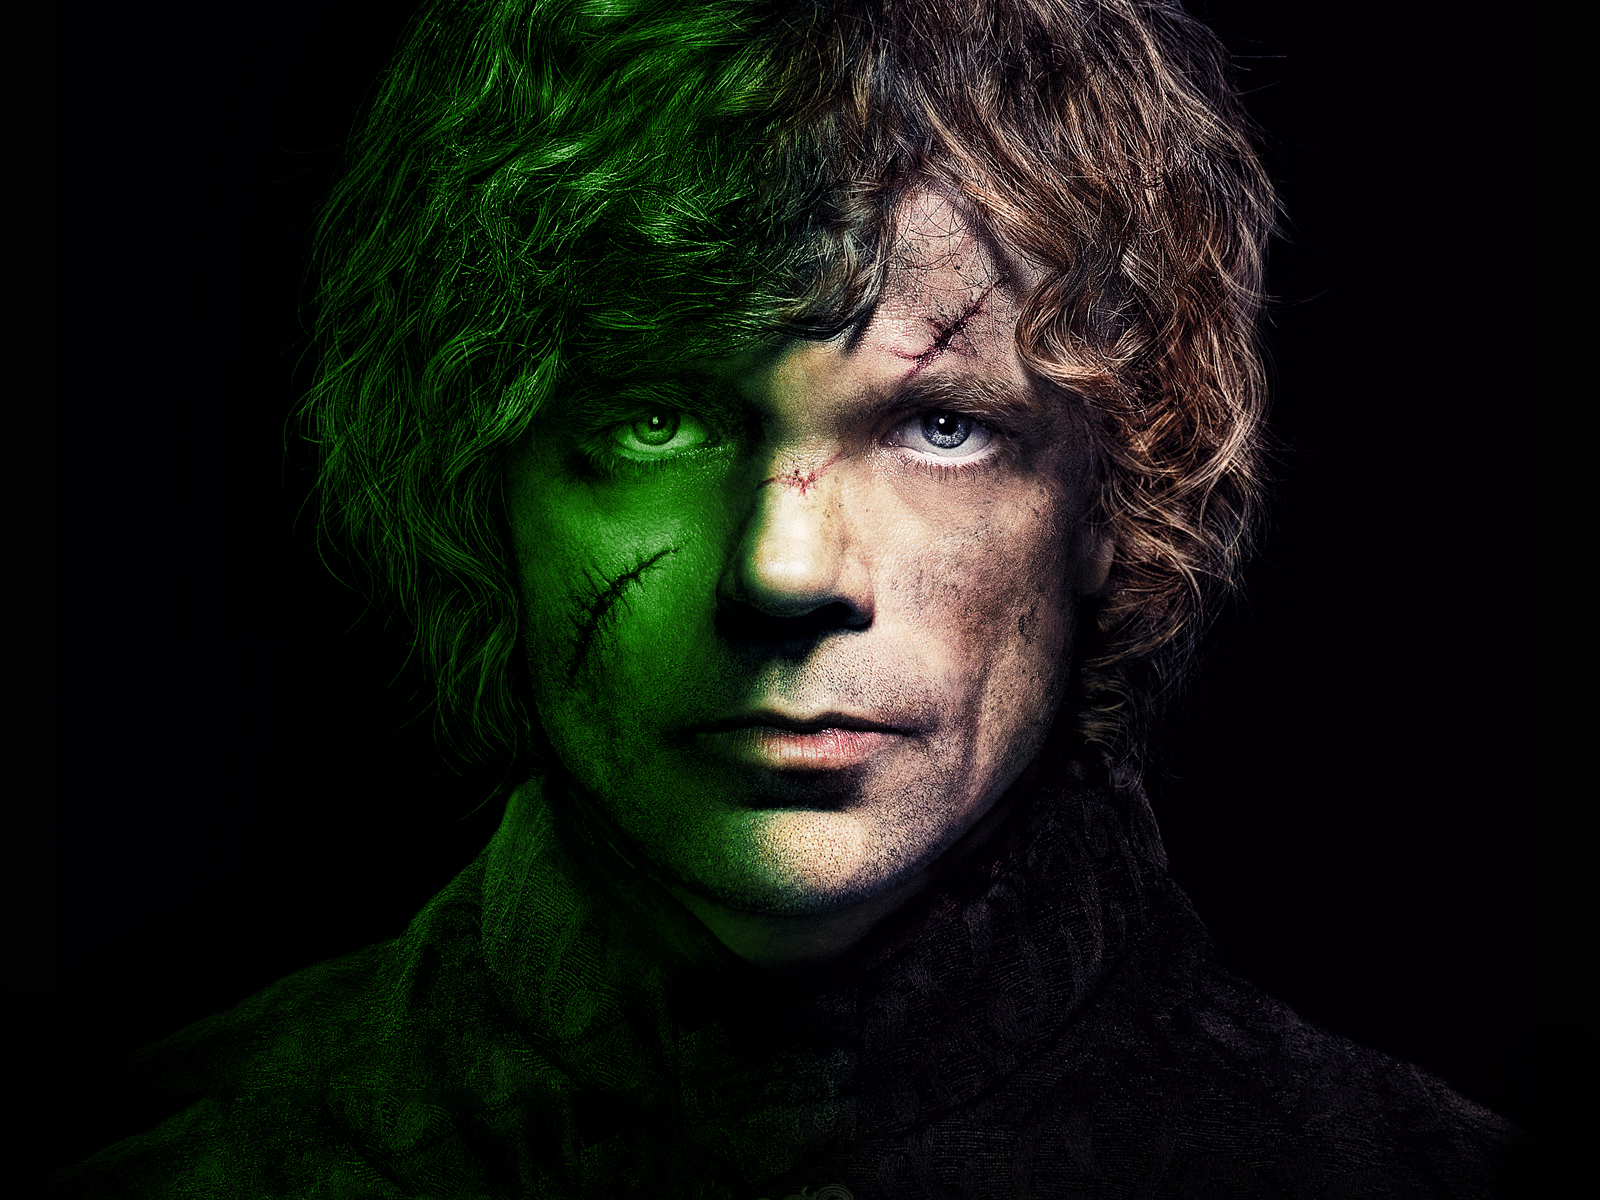 Wallpaper Full HD tyrion lannister, game of thrones, tv show, peter dinklage